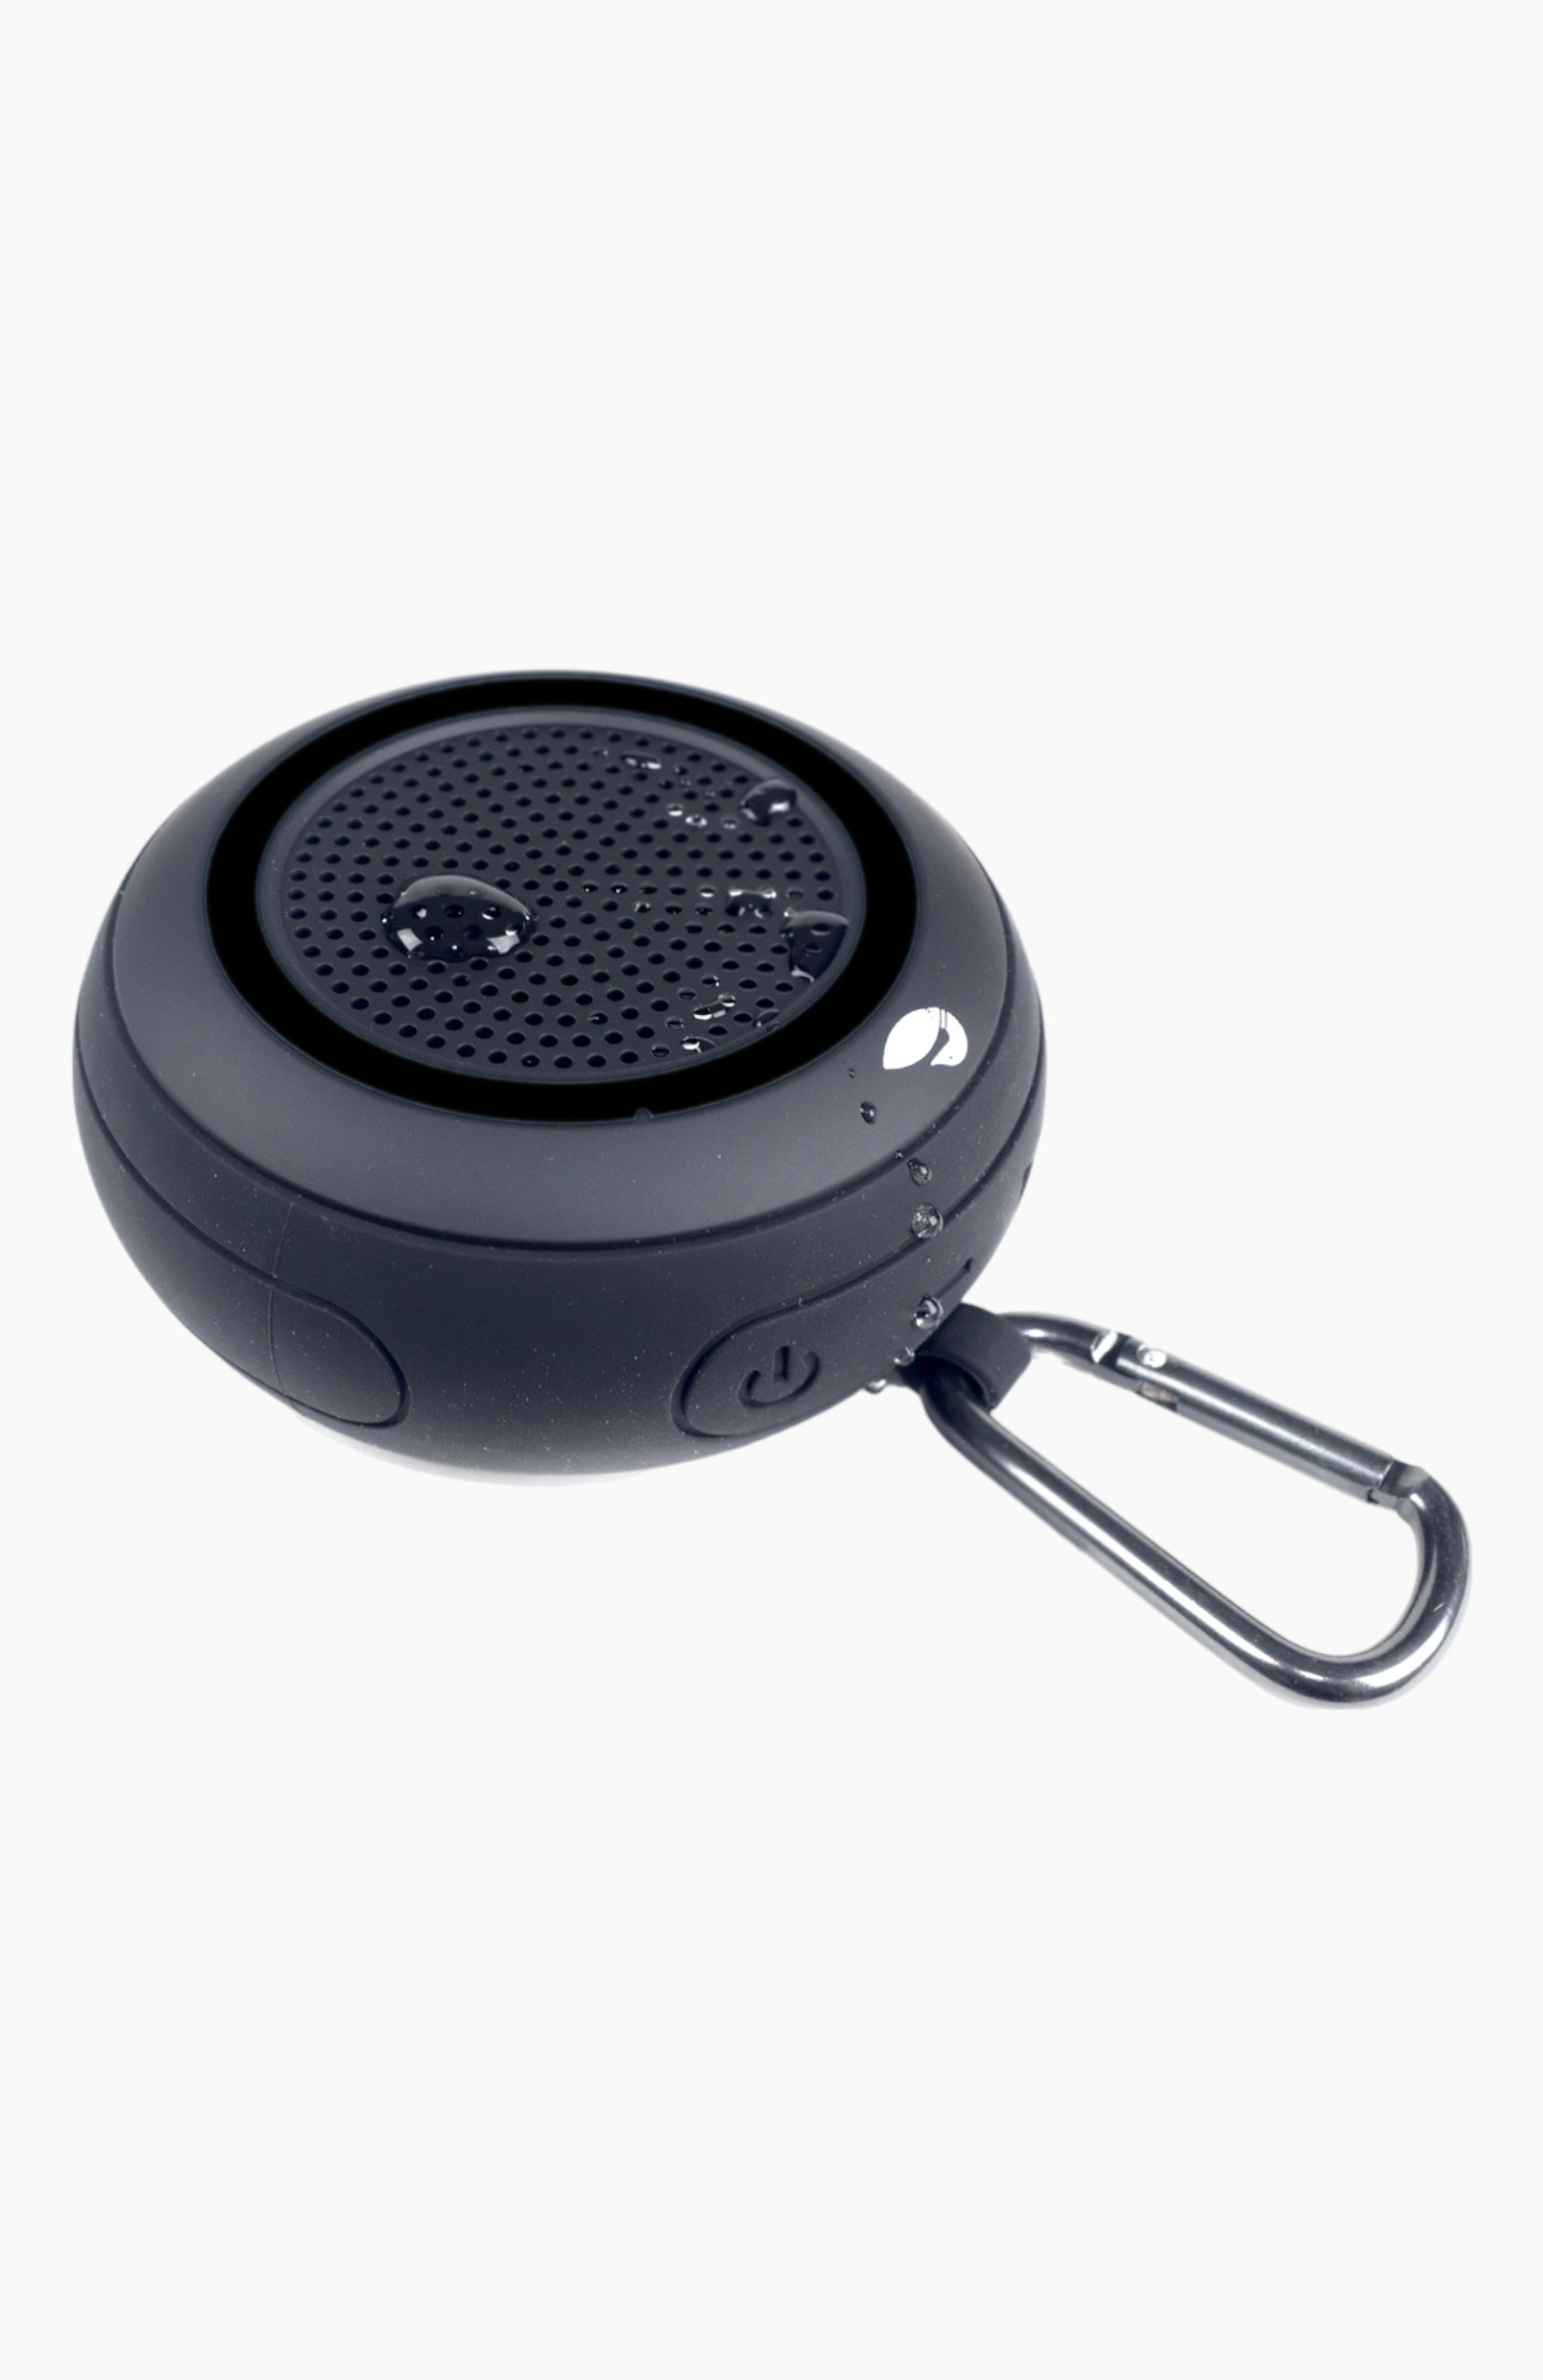 Round black speaker with carabiner clip attached with a few water drops on it.